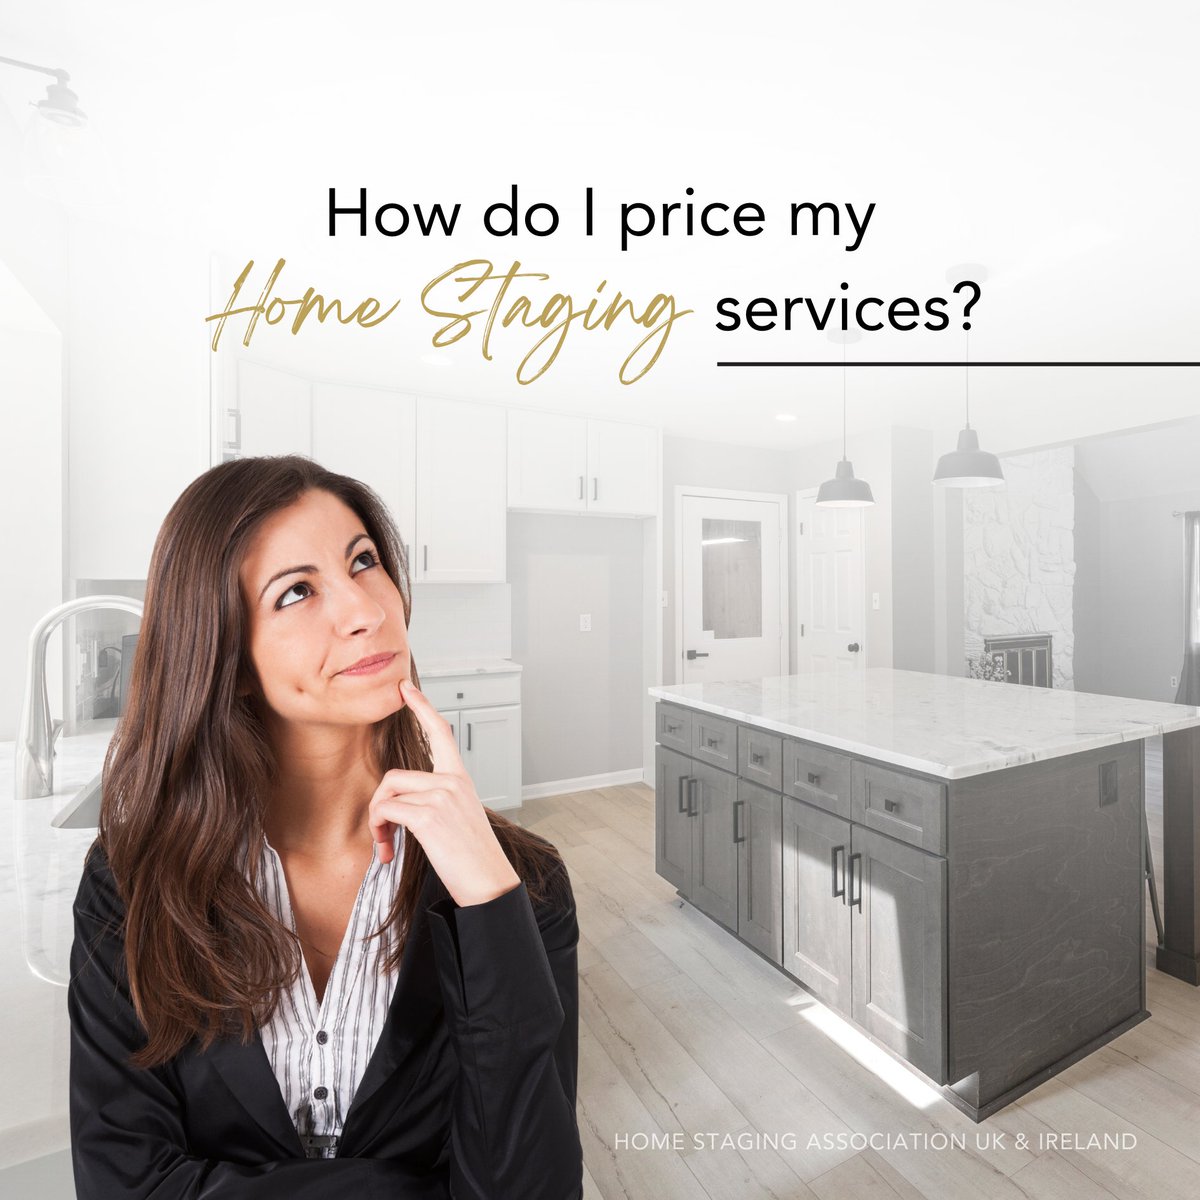 Ready to transform your pricing game? Enrol in the Pricing Lab for Home Stagers™ today and step into a world where your fees match your value. Click here to learn more: zurl.co/NBfY 

#pricingstrategies #pricingmistakes #stagingstudio #hsauk